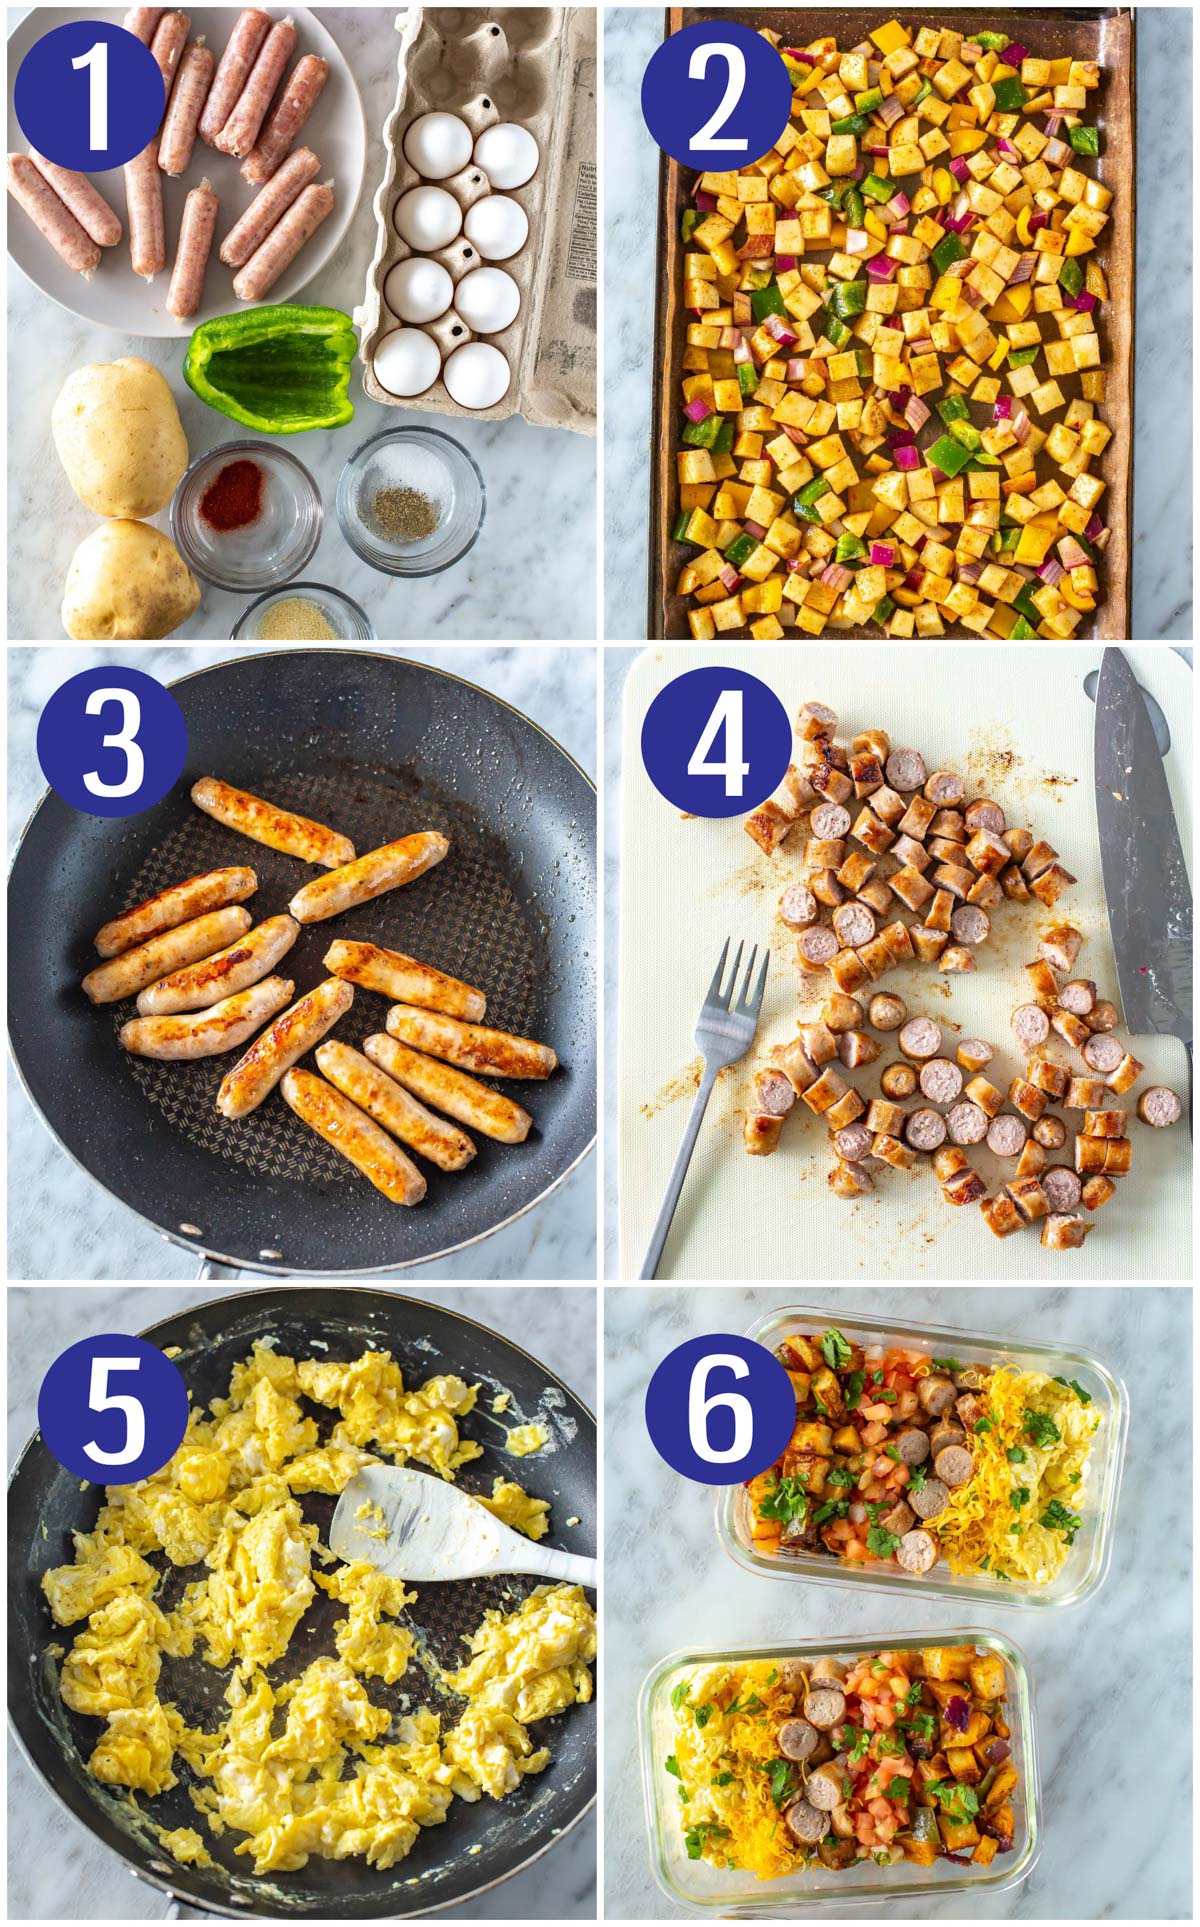 Step-by-step instructions collage for making breakfast bowls: assemble ingredients, roast potatoes, bell pepper and red onion, cook sausage, cut up sausage, scramble eggs, assemble bowls.